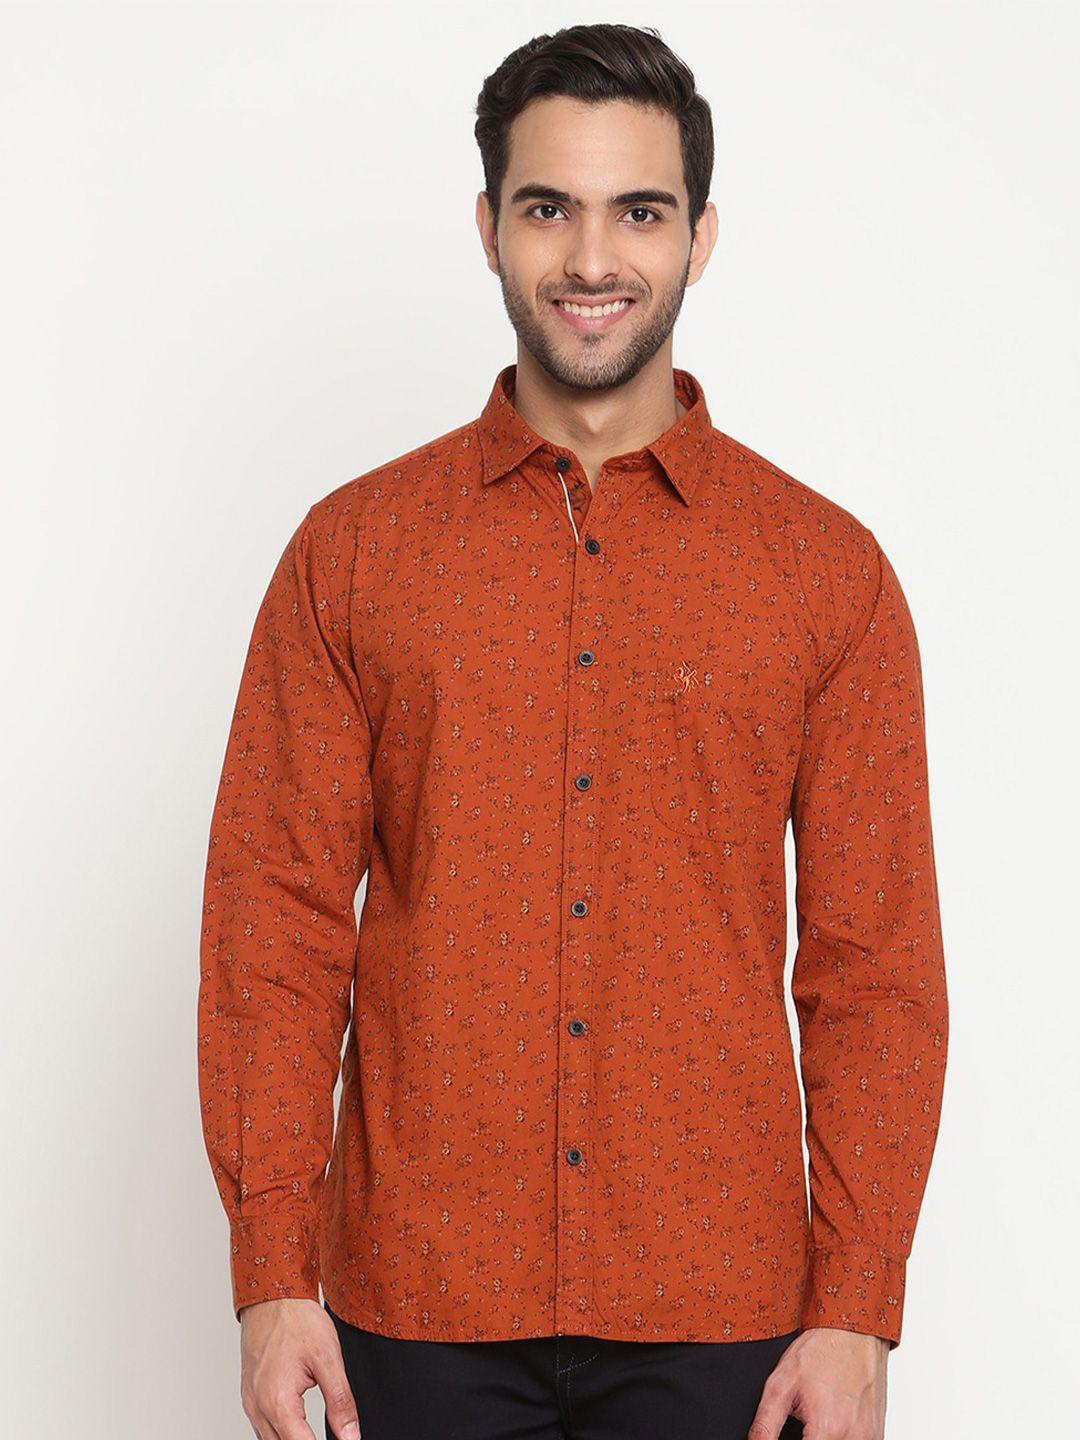 cantabil floral printed cotton casual shirt